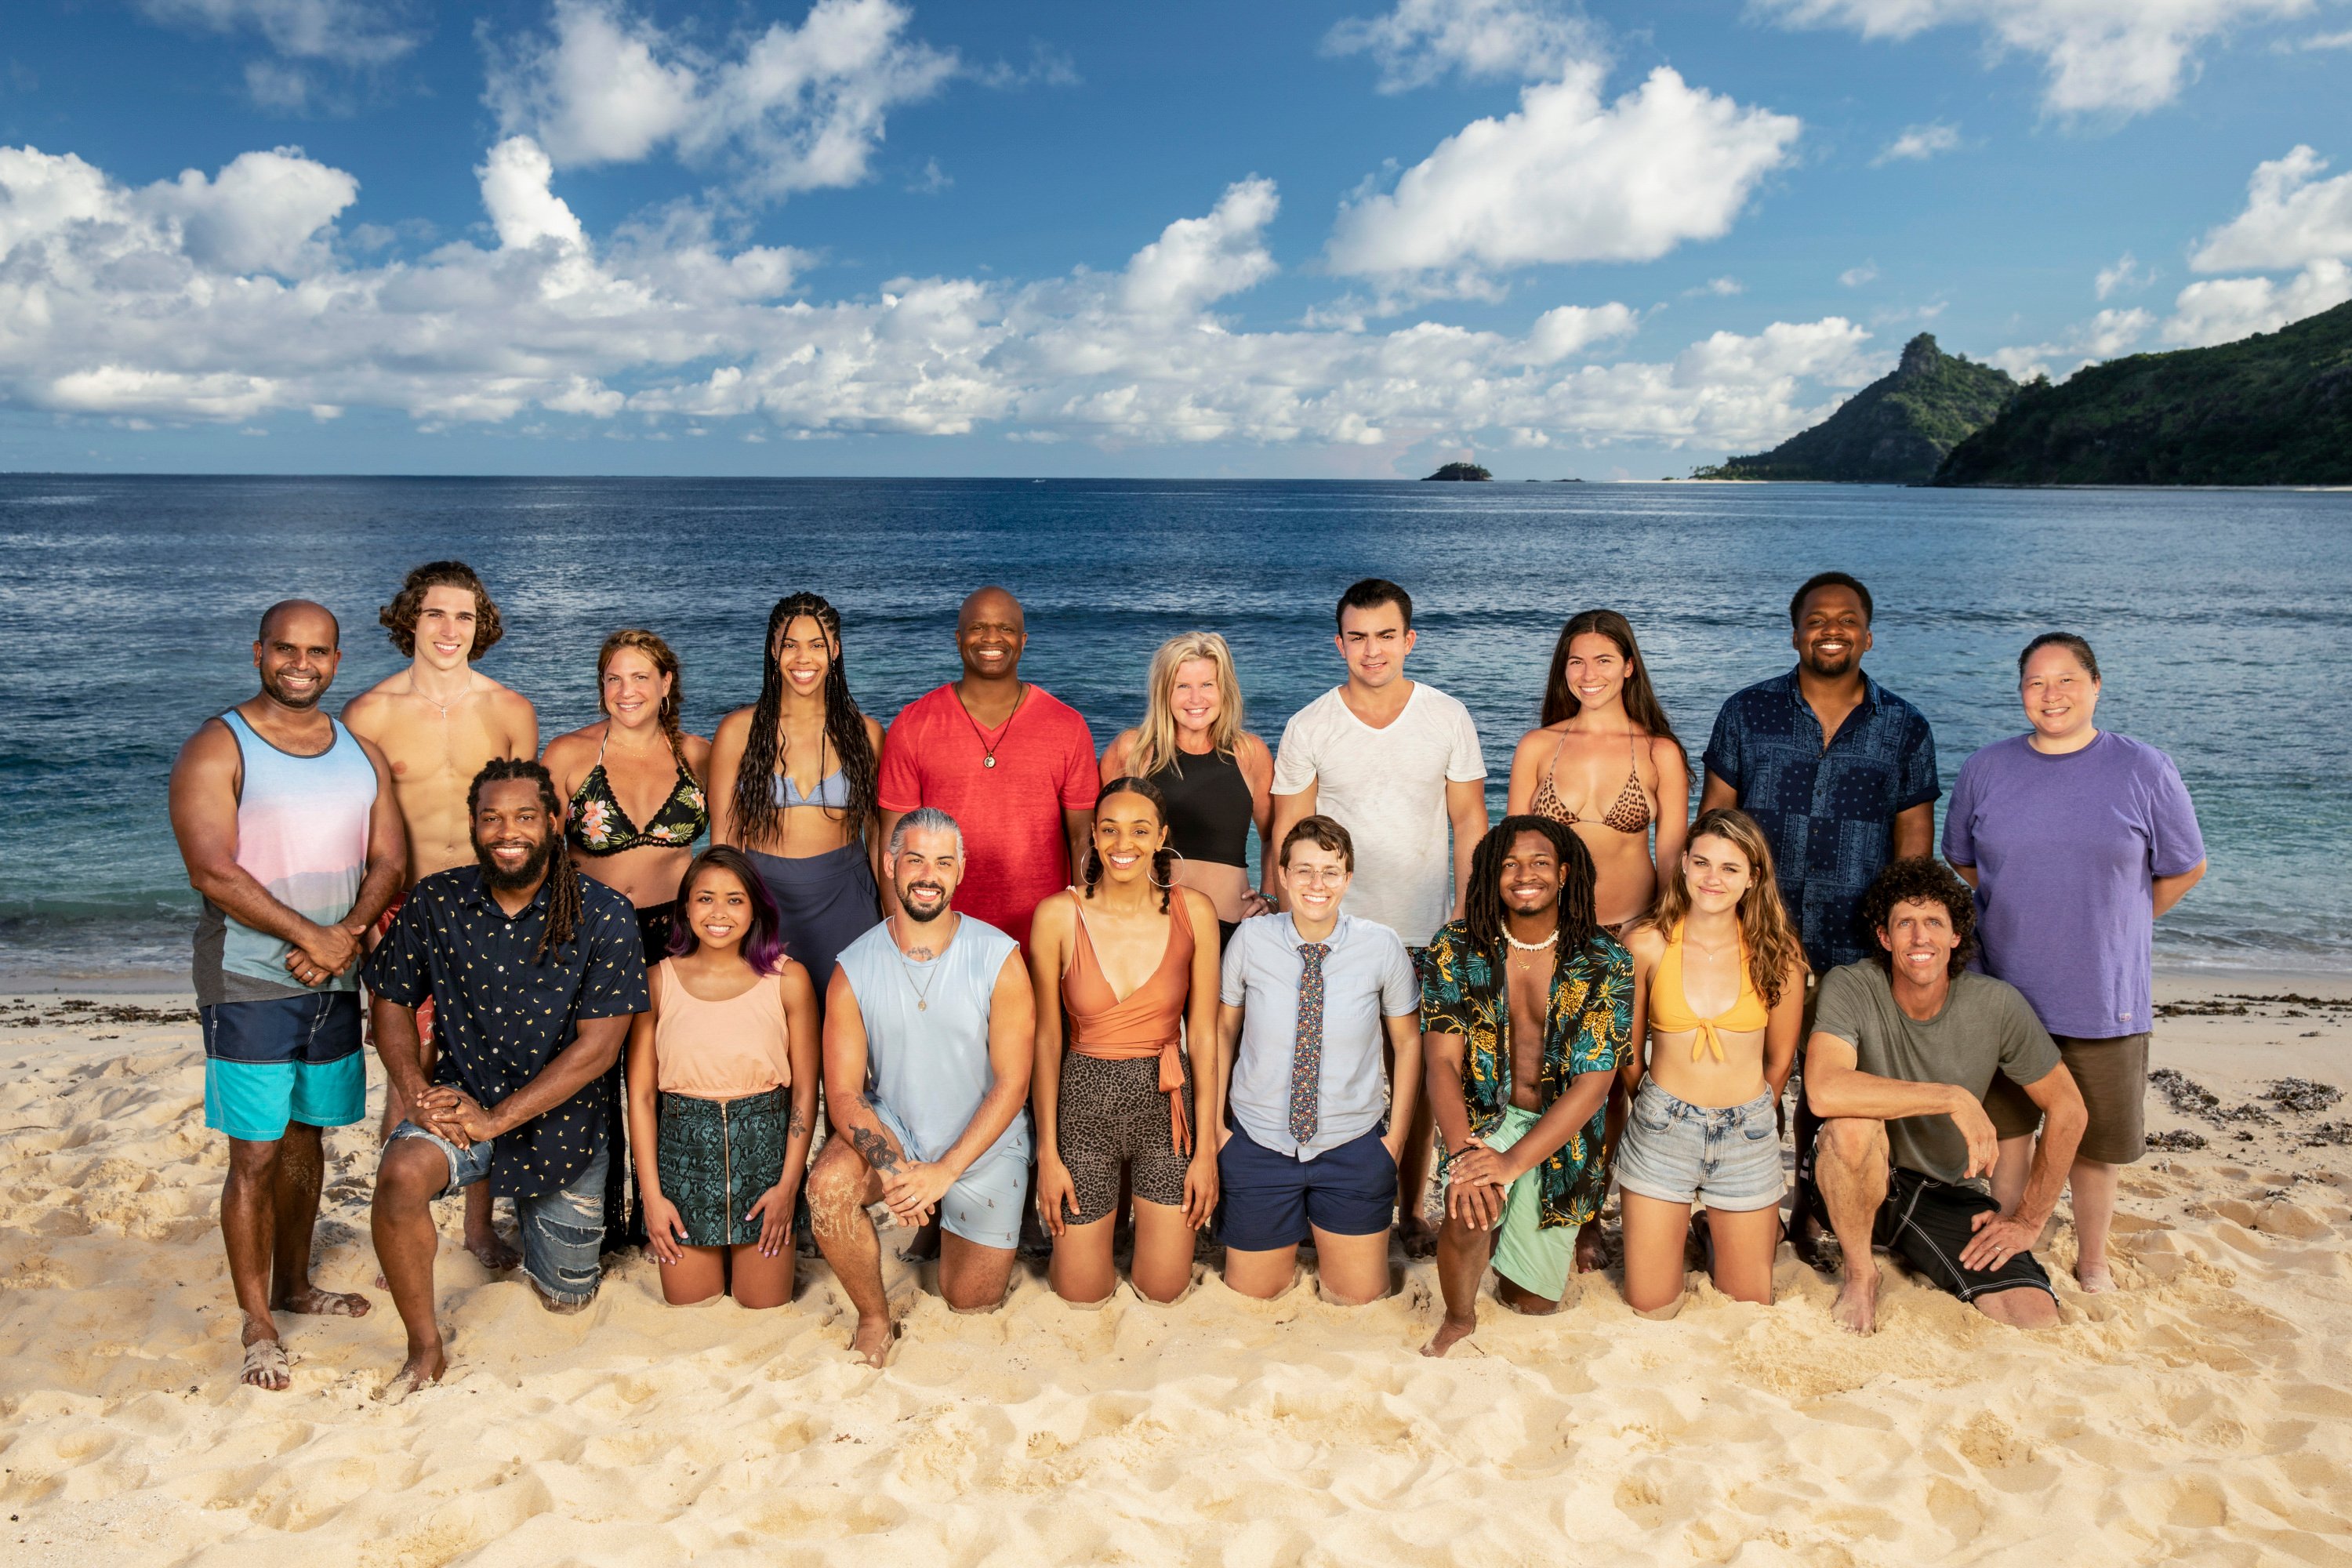 The cast of 'Survivor' Season 41 poses for a picture on the beach. Ten castaways stand in the back row, and the other eight kneel in front of them. Spoilers for the season might indicate that two of these contestants engage in a showmance.